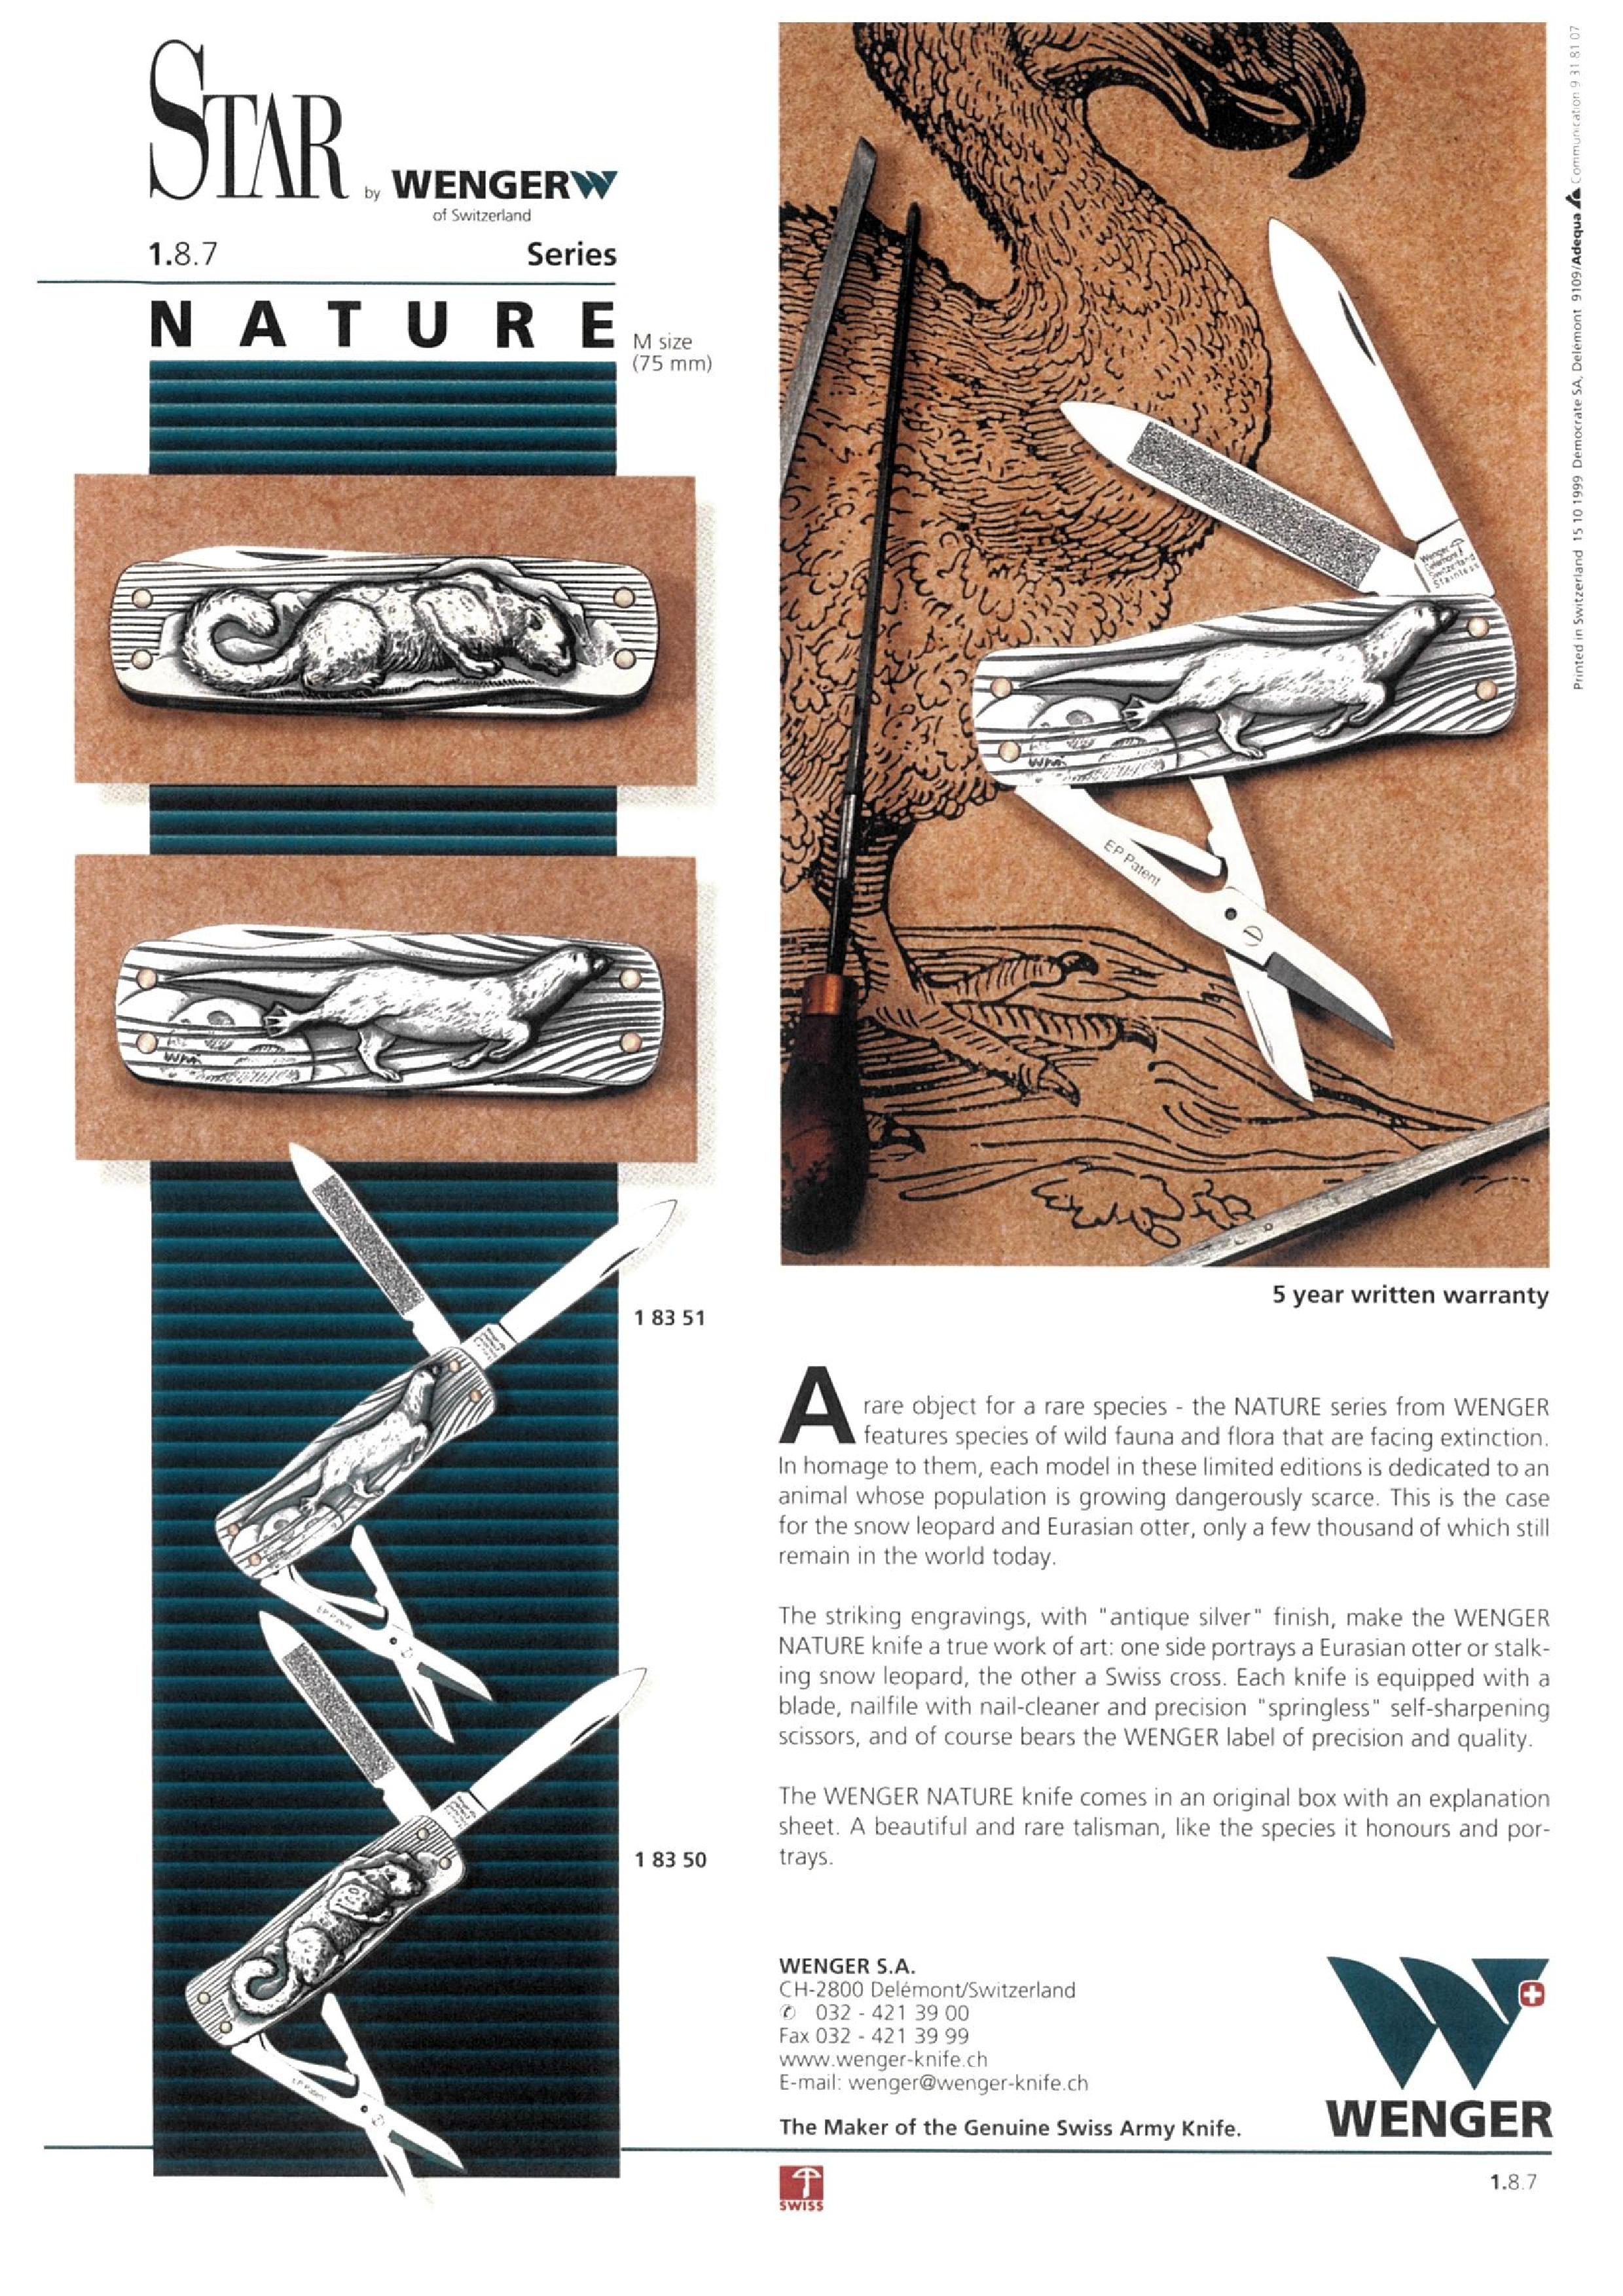 Nature Series Sales Sheet from WENGER featuring striking engravings with "antique silver" finish. 1999
By courtesy of Victorinox, 2016
